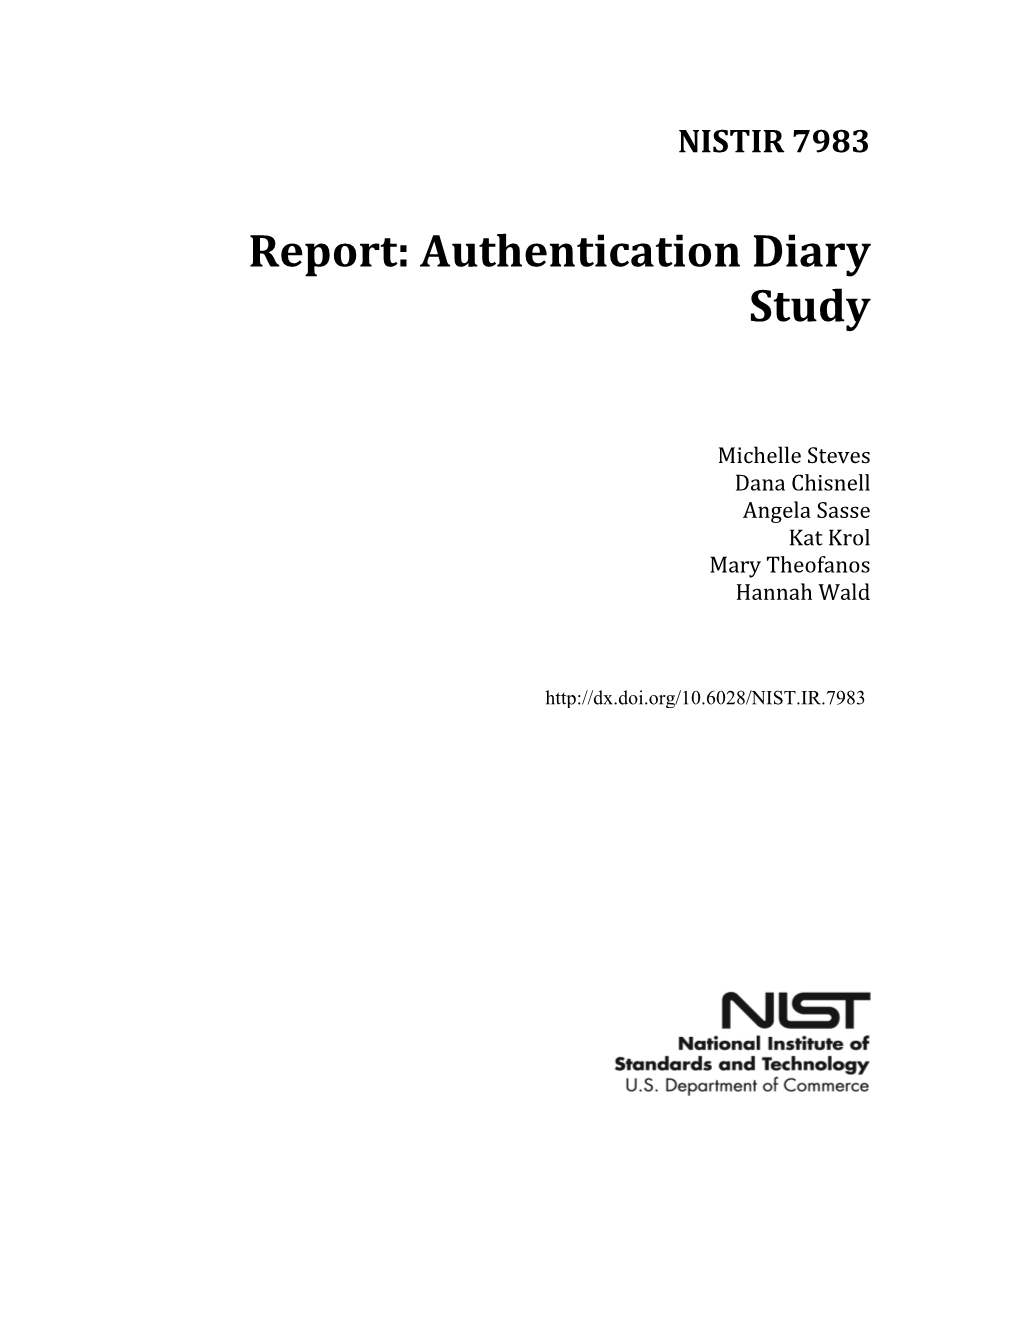 Authentication Diary Study